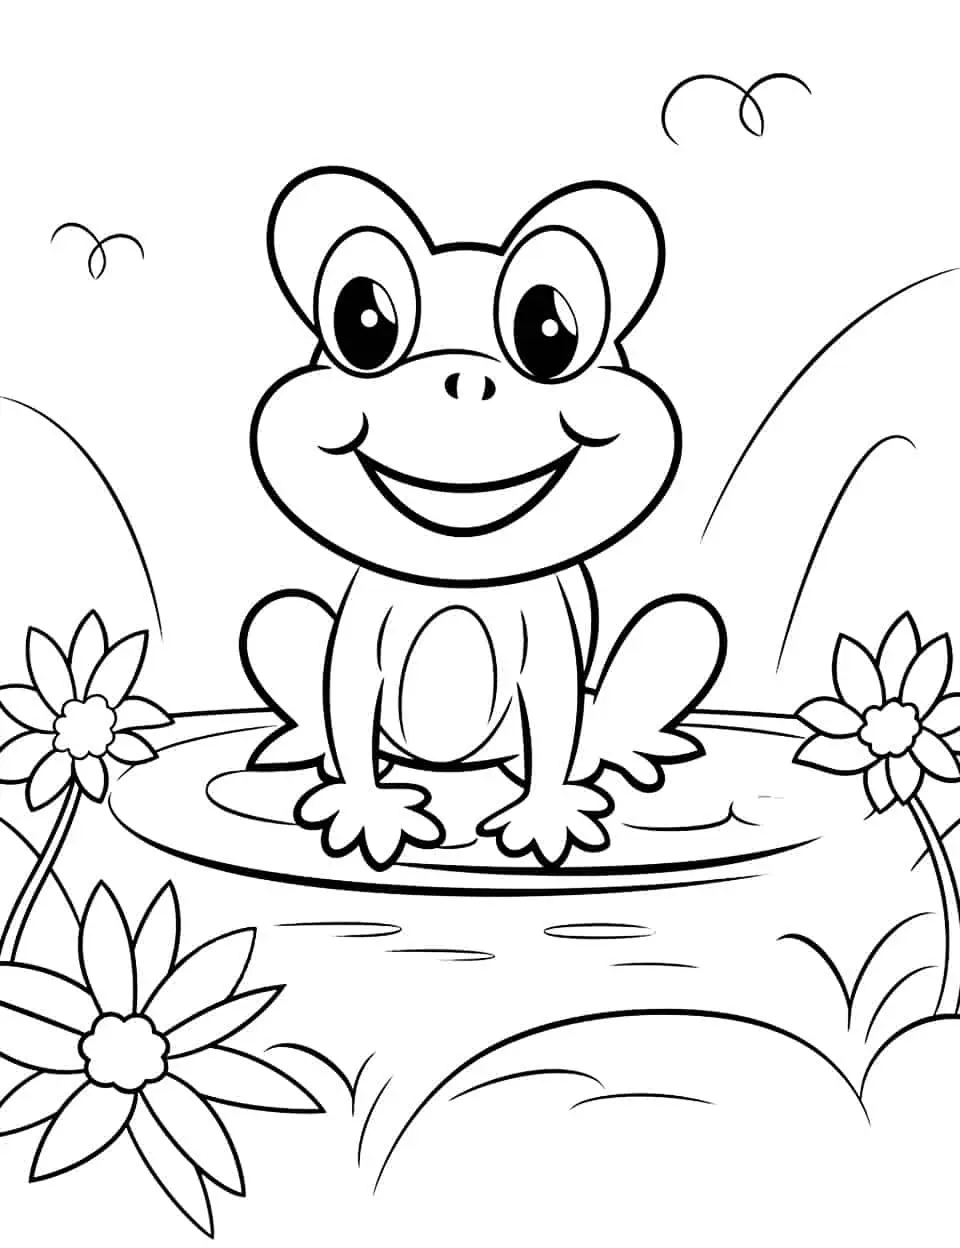 Hop Into Spring with Frog Coloring Page - A spring-themed coloring page featuring a frog hopping on lily pads in a pond.